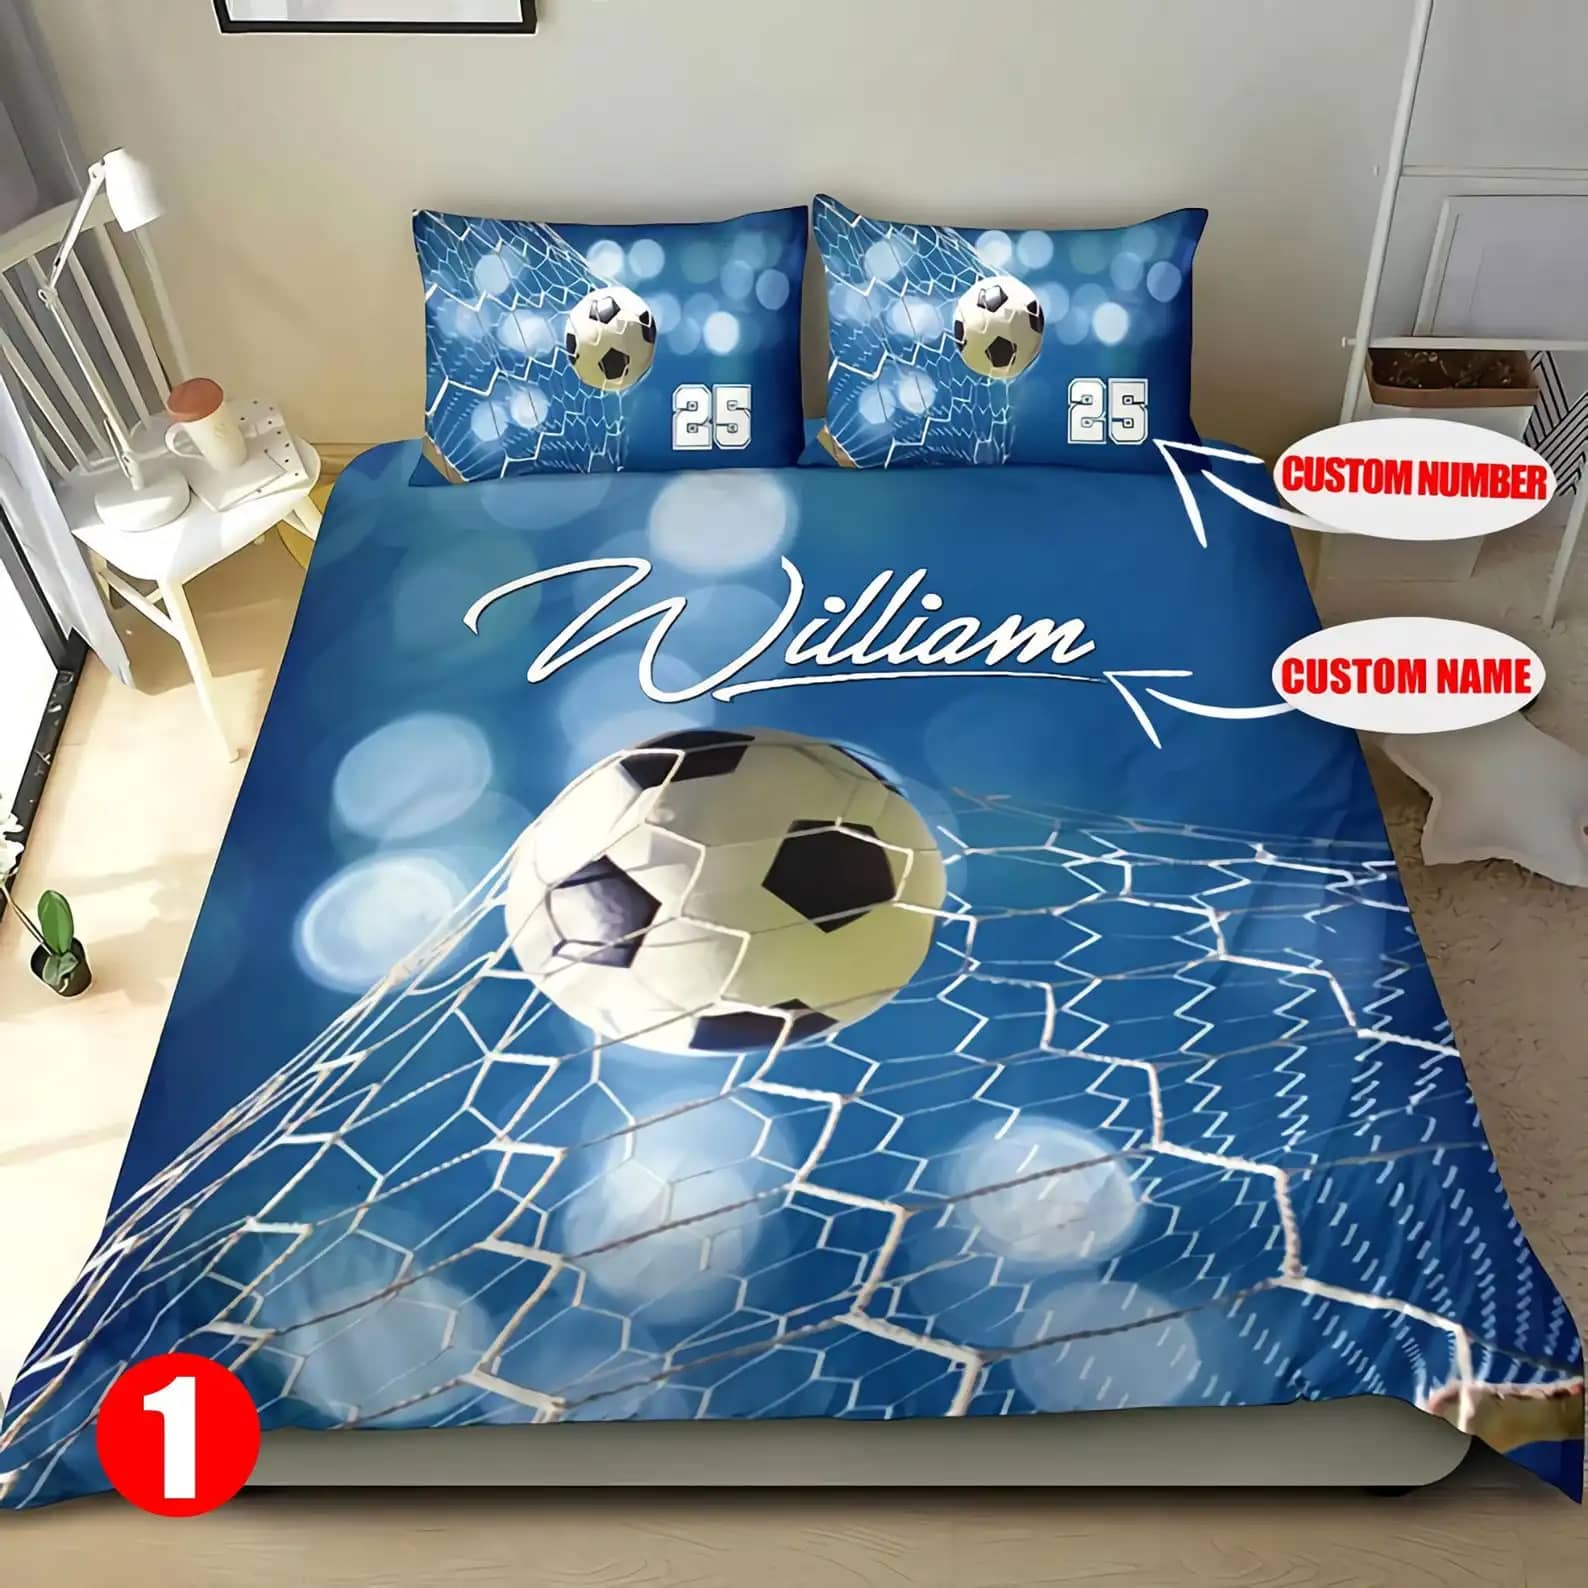 Soccer Is My Life Blue Bedding Custom Name Personalized Quilt Bedding Sets